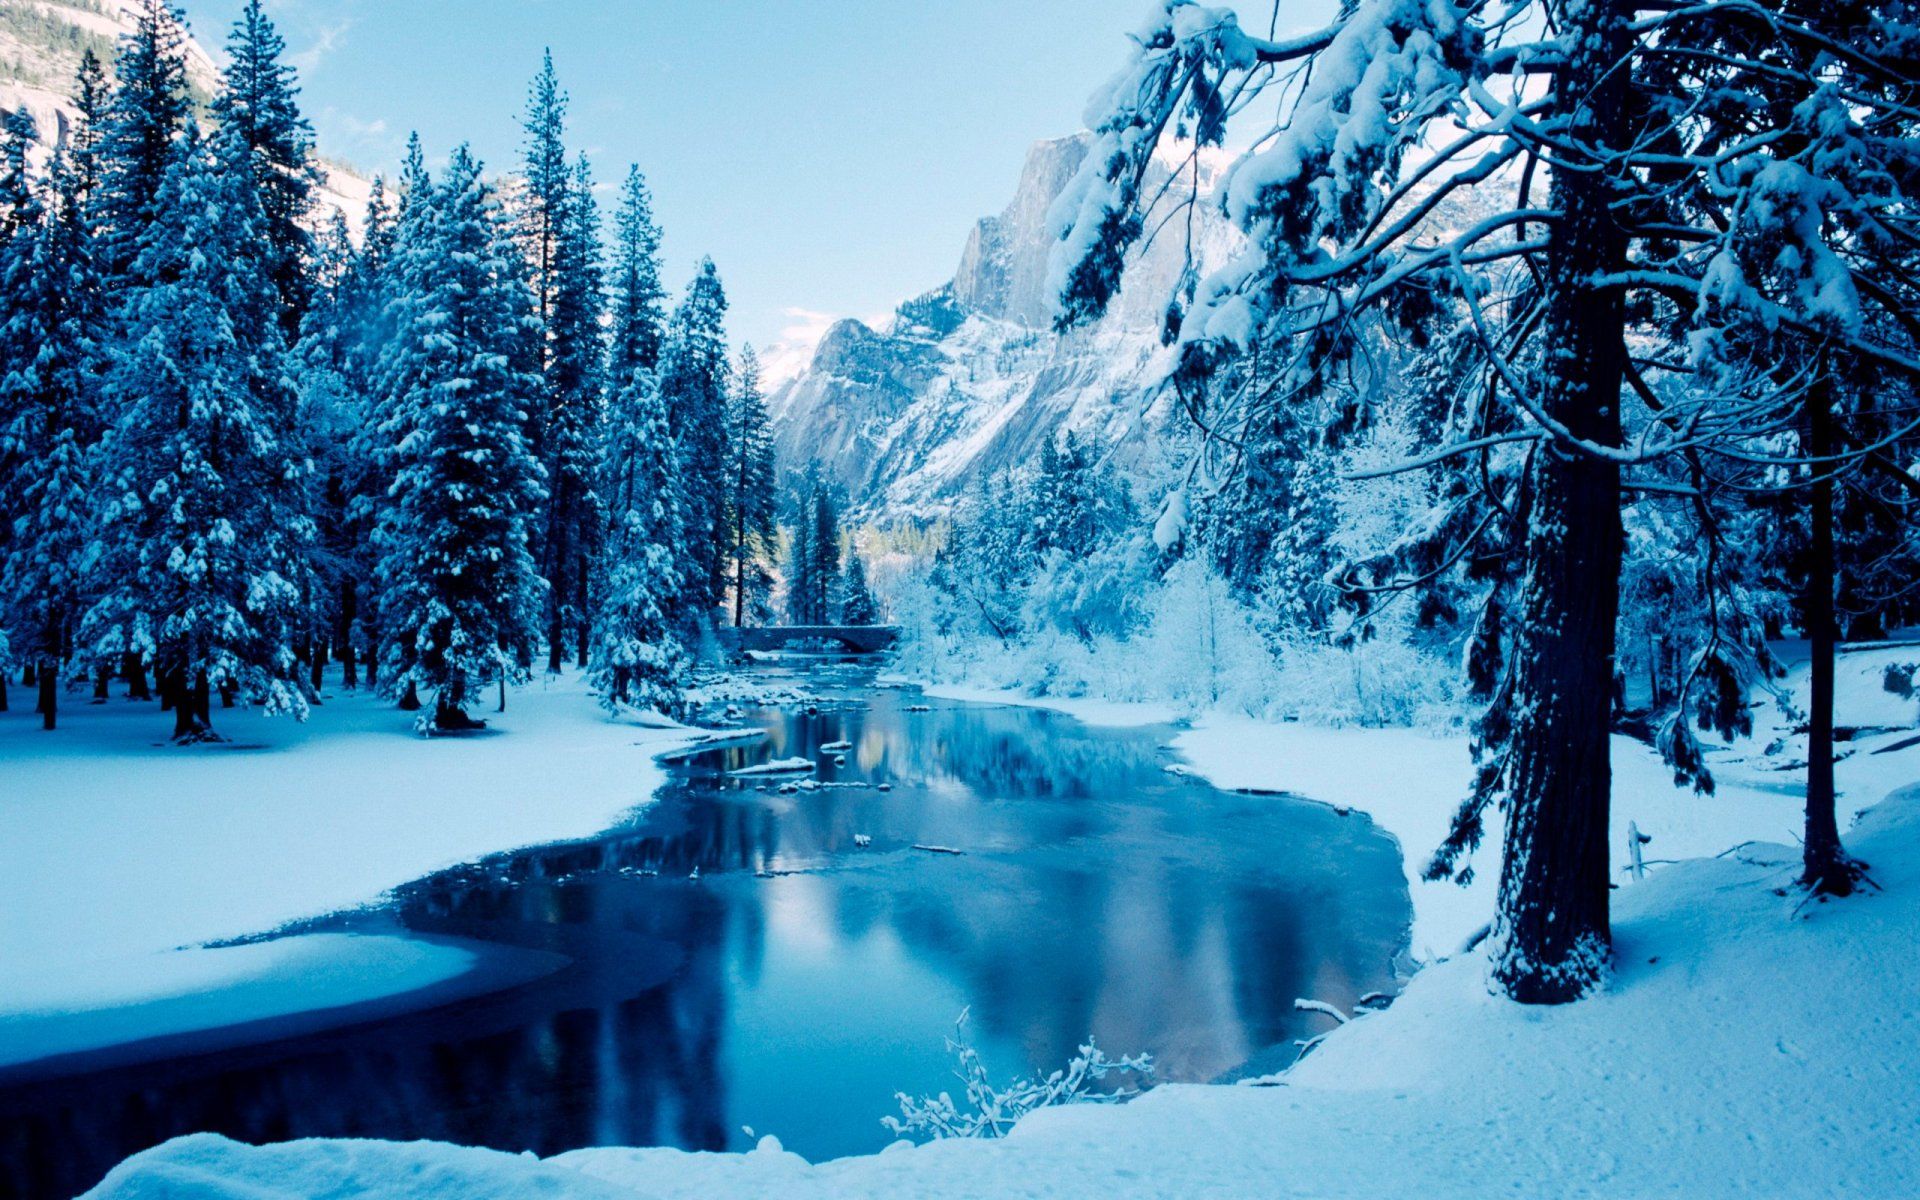 Blue ice winter landscape | LD Inspirations: Icy & Snowy places ...